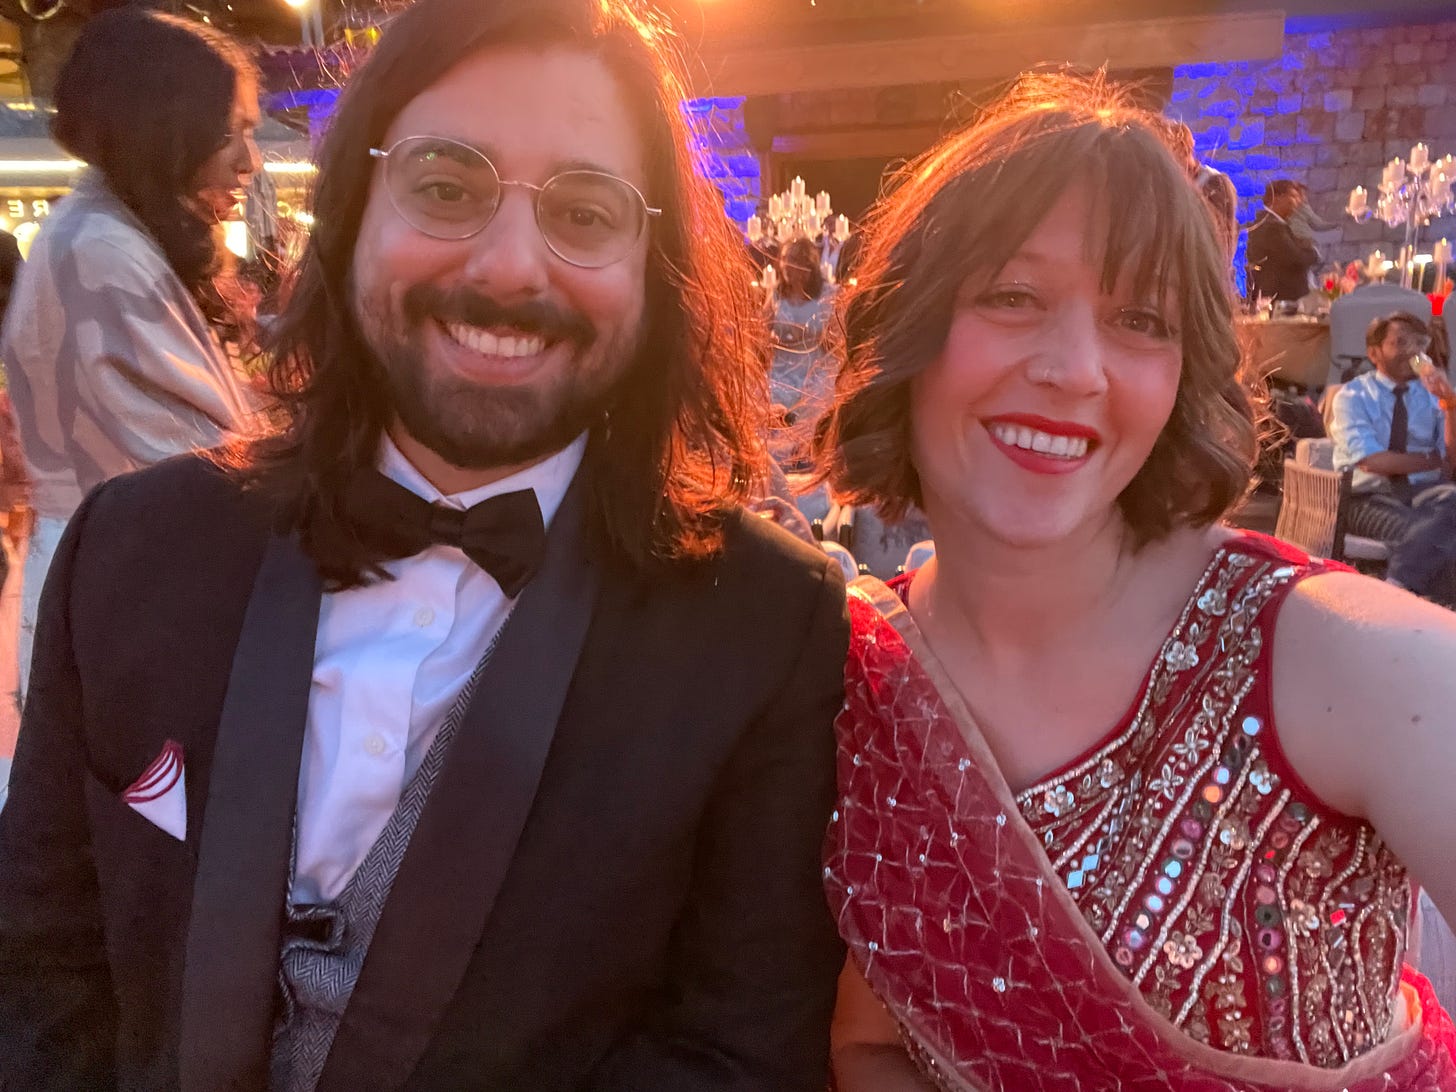 Alex in a tux and Camille in a red lehenga at a wedding in Turkey.